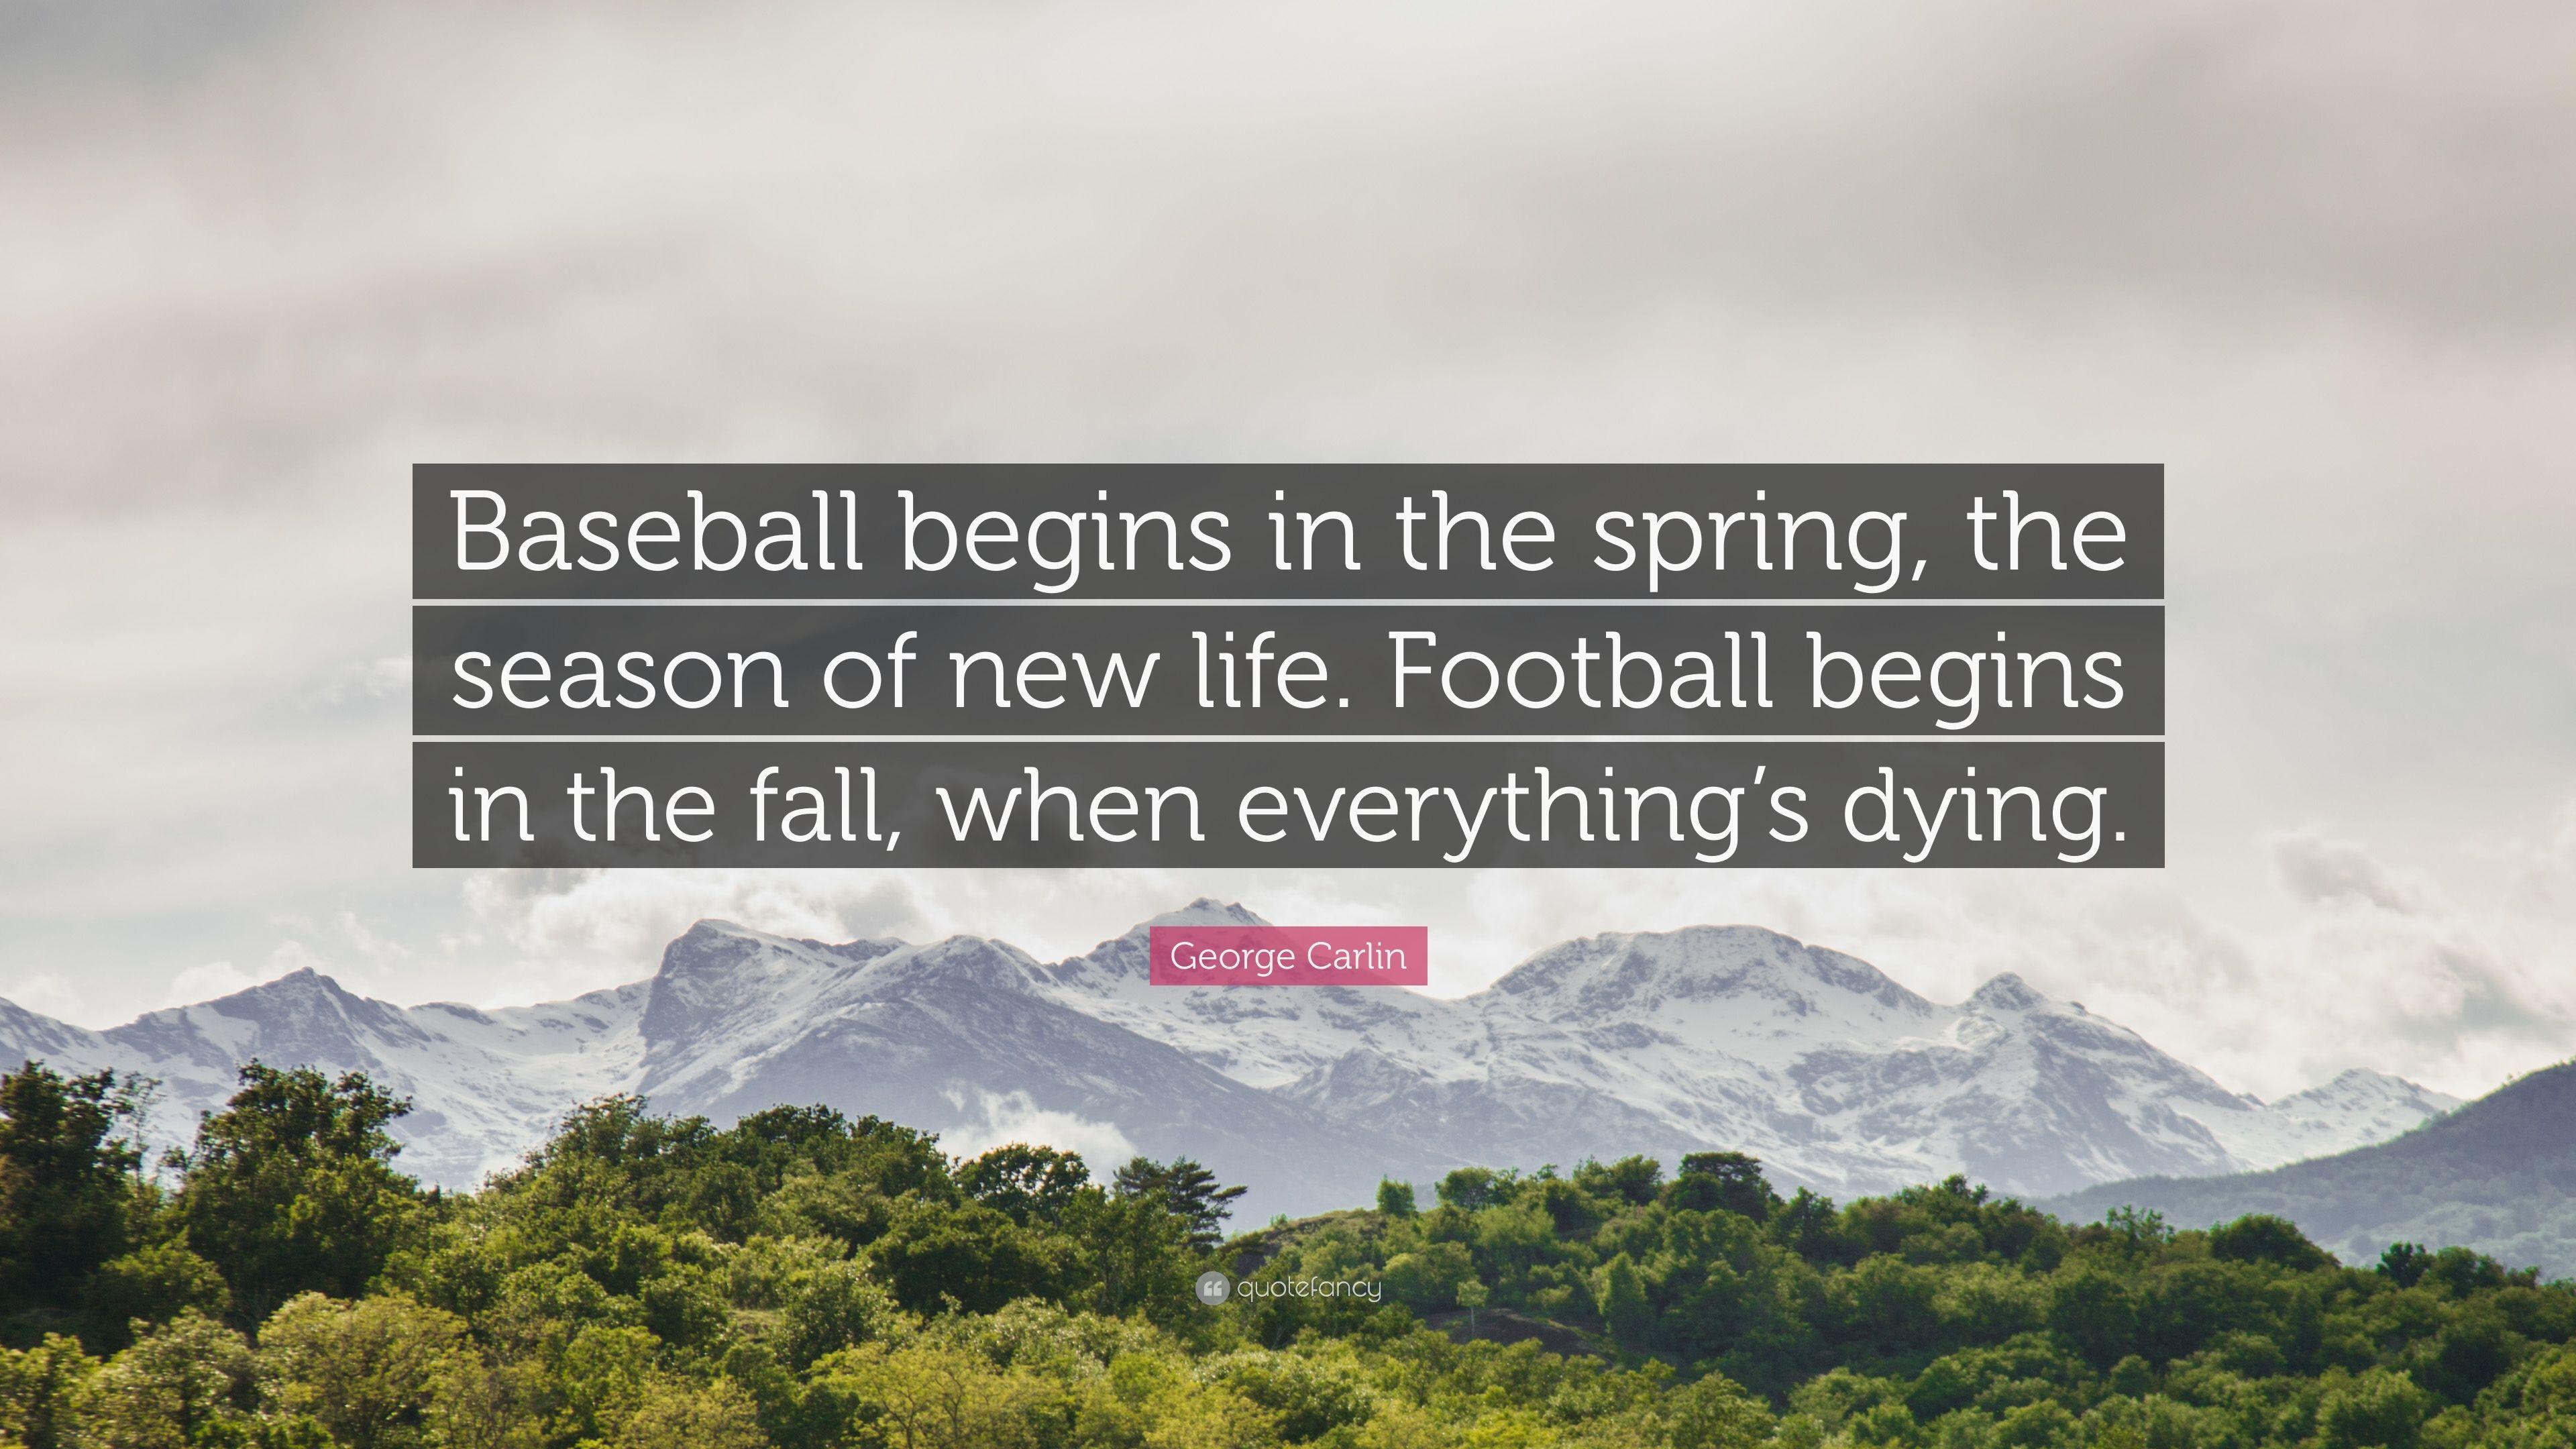 George Carlin Quote: “Baseball begins in the spring, the season